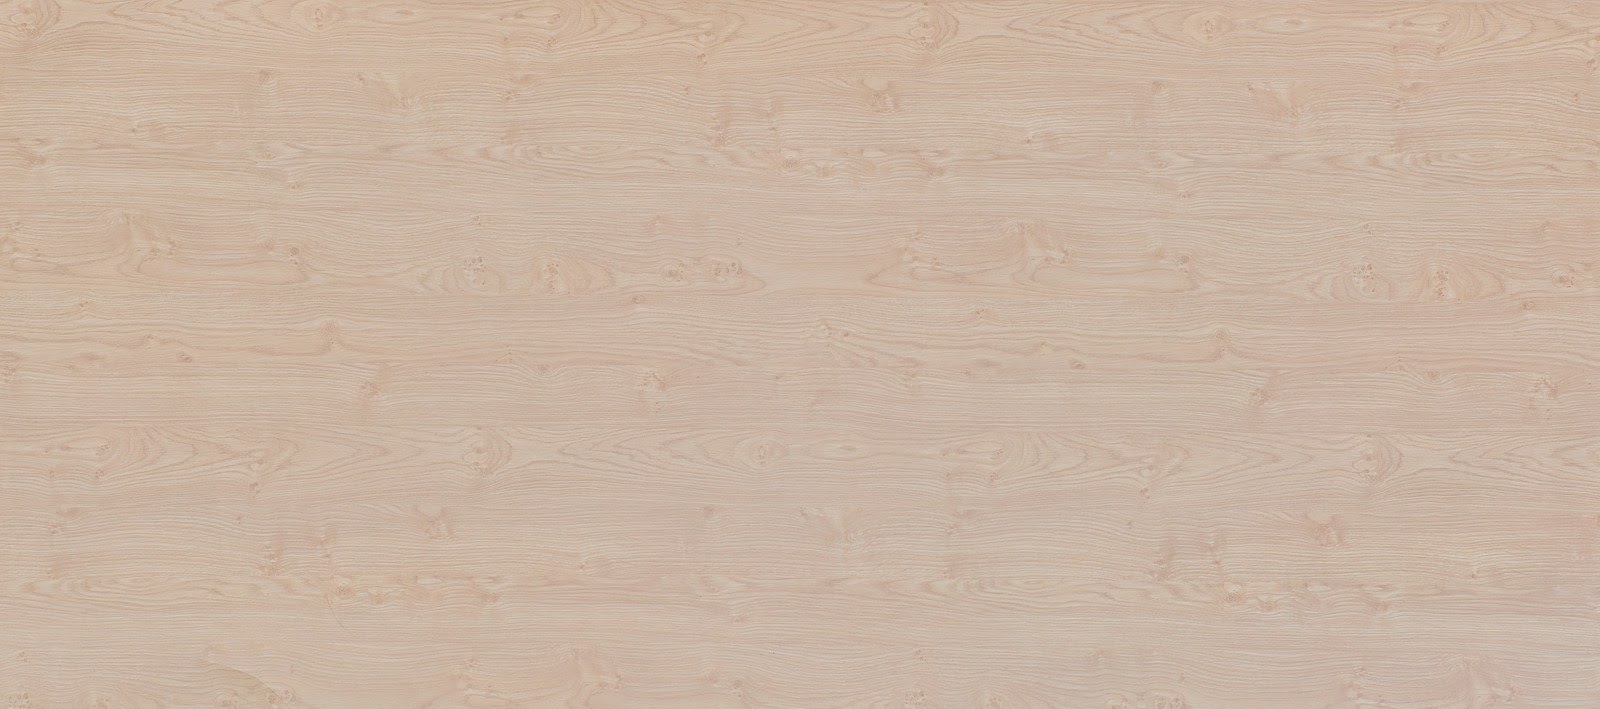 wood texture mapping